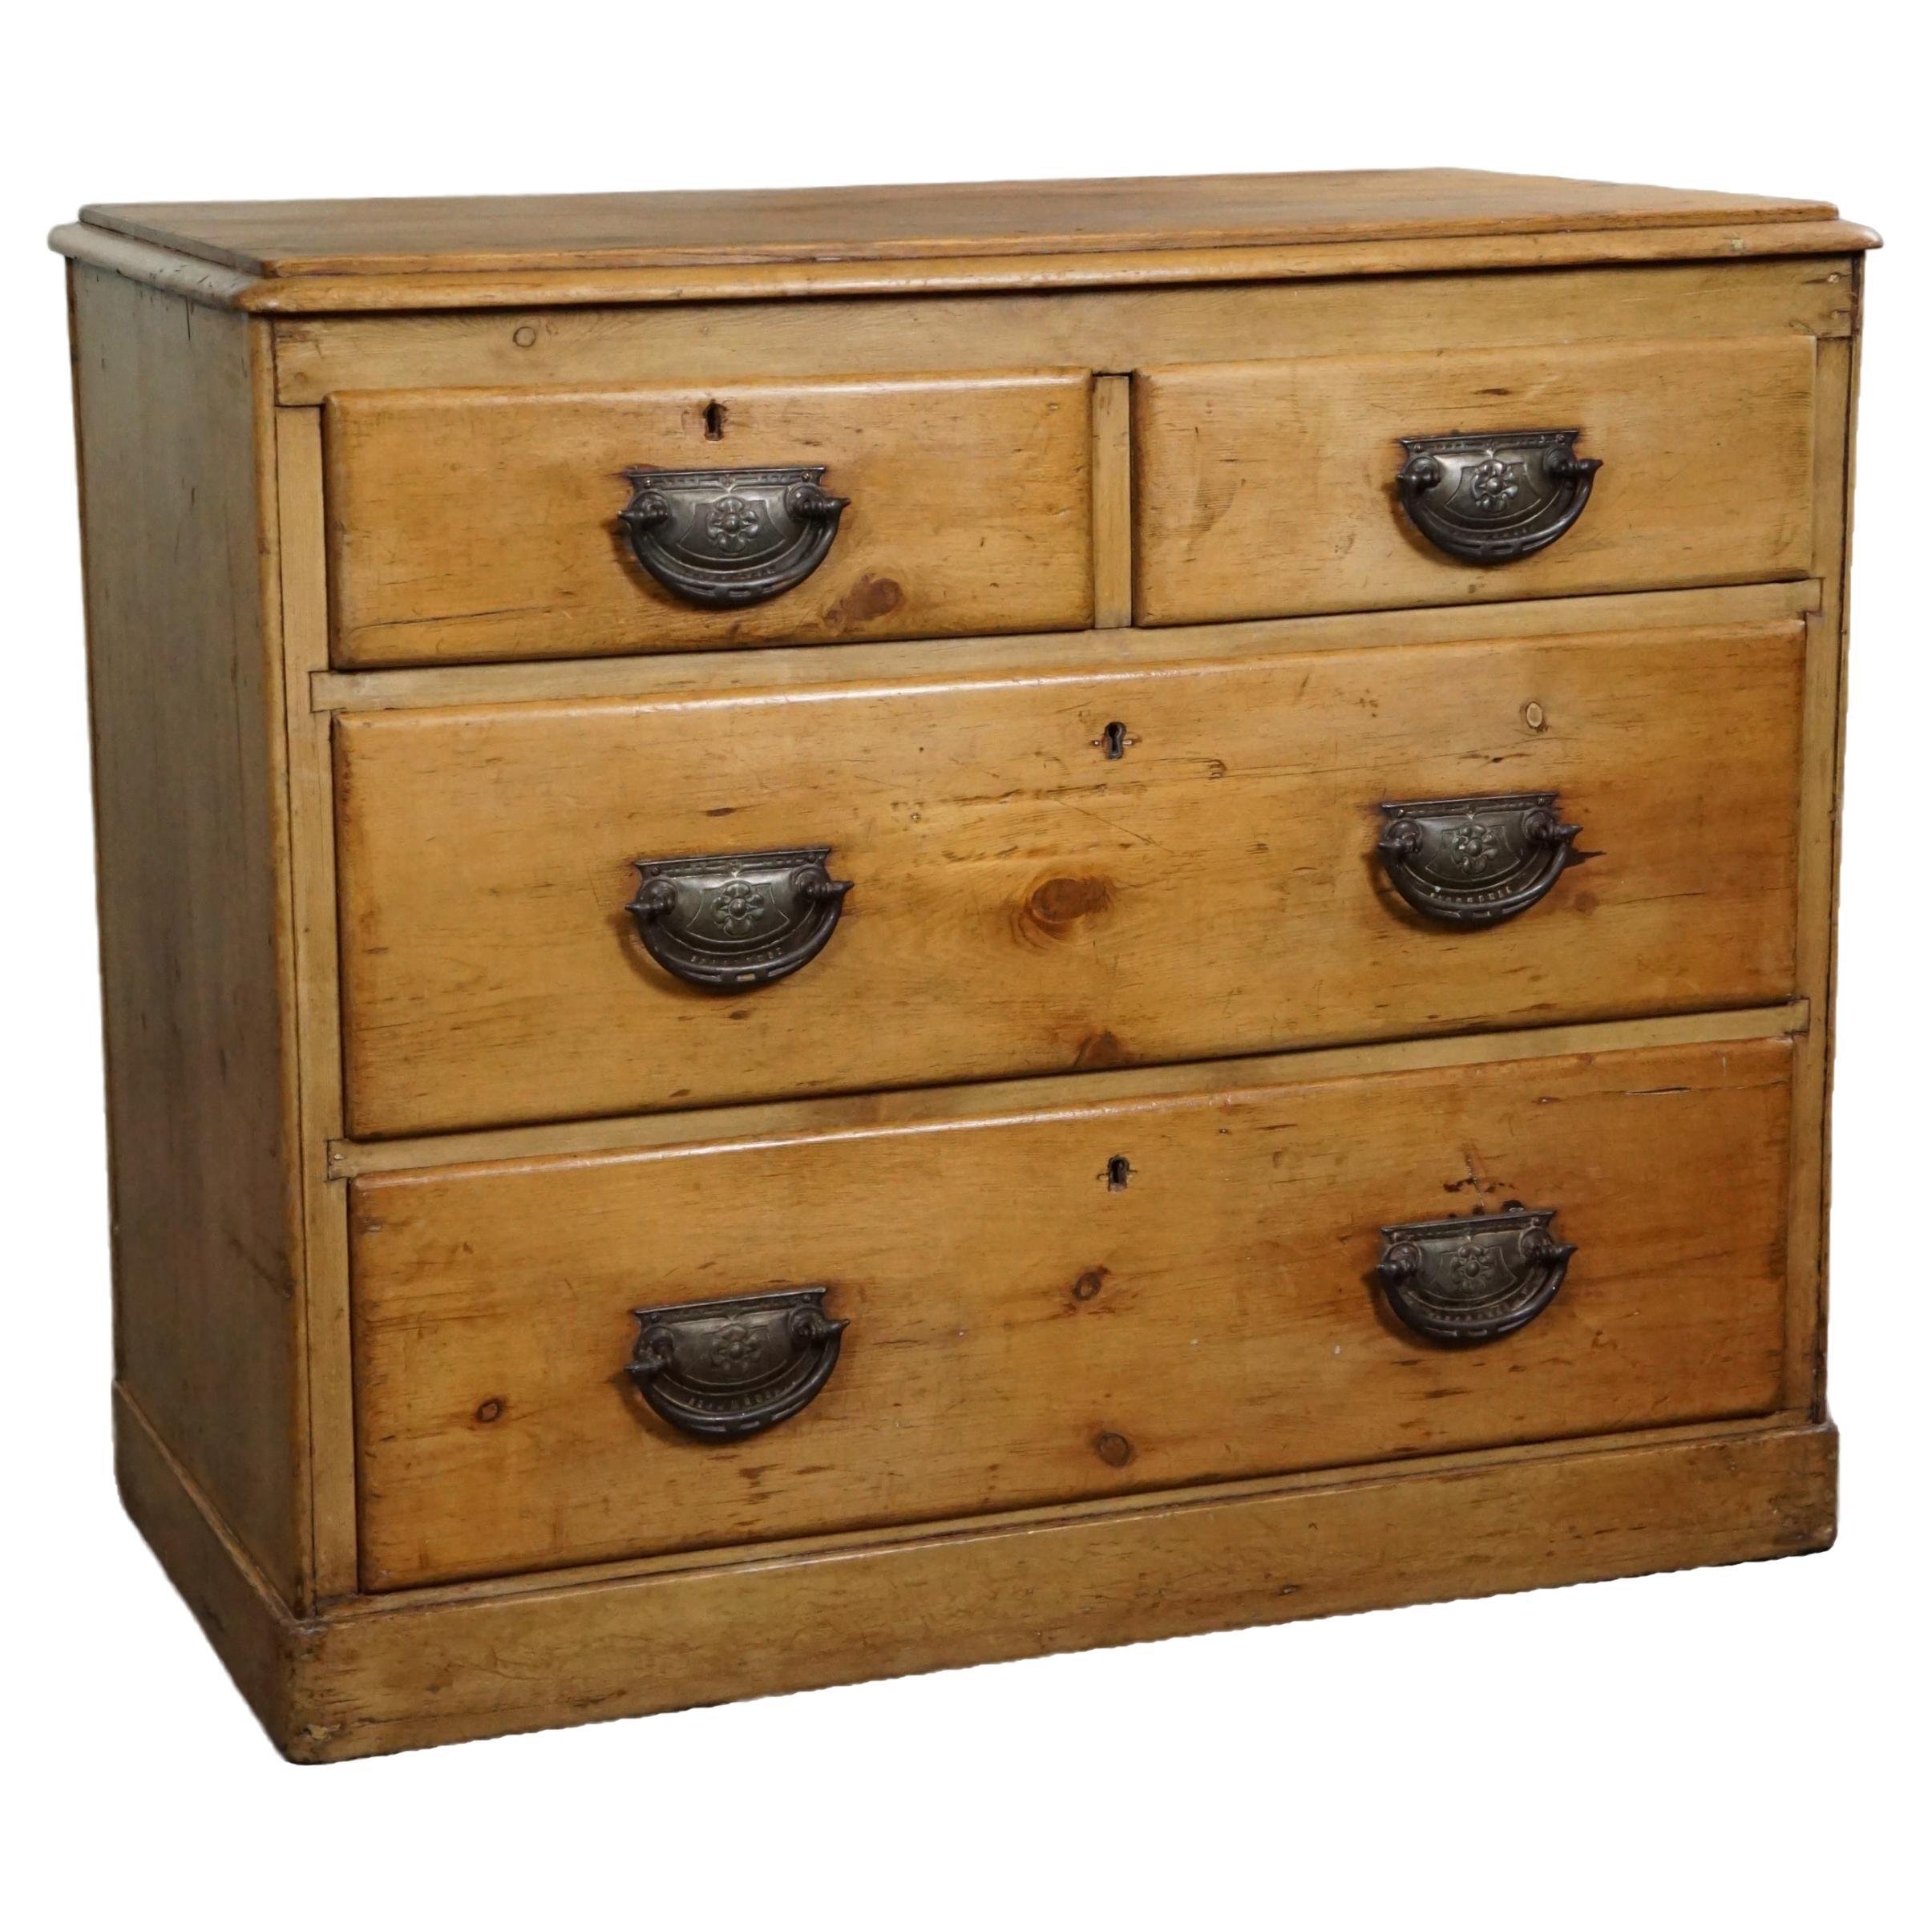 Old pine antique English chest of drawers with four drawers For Sale